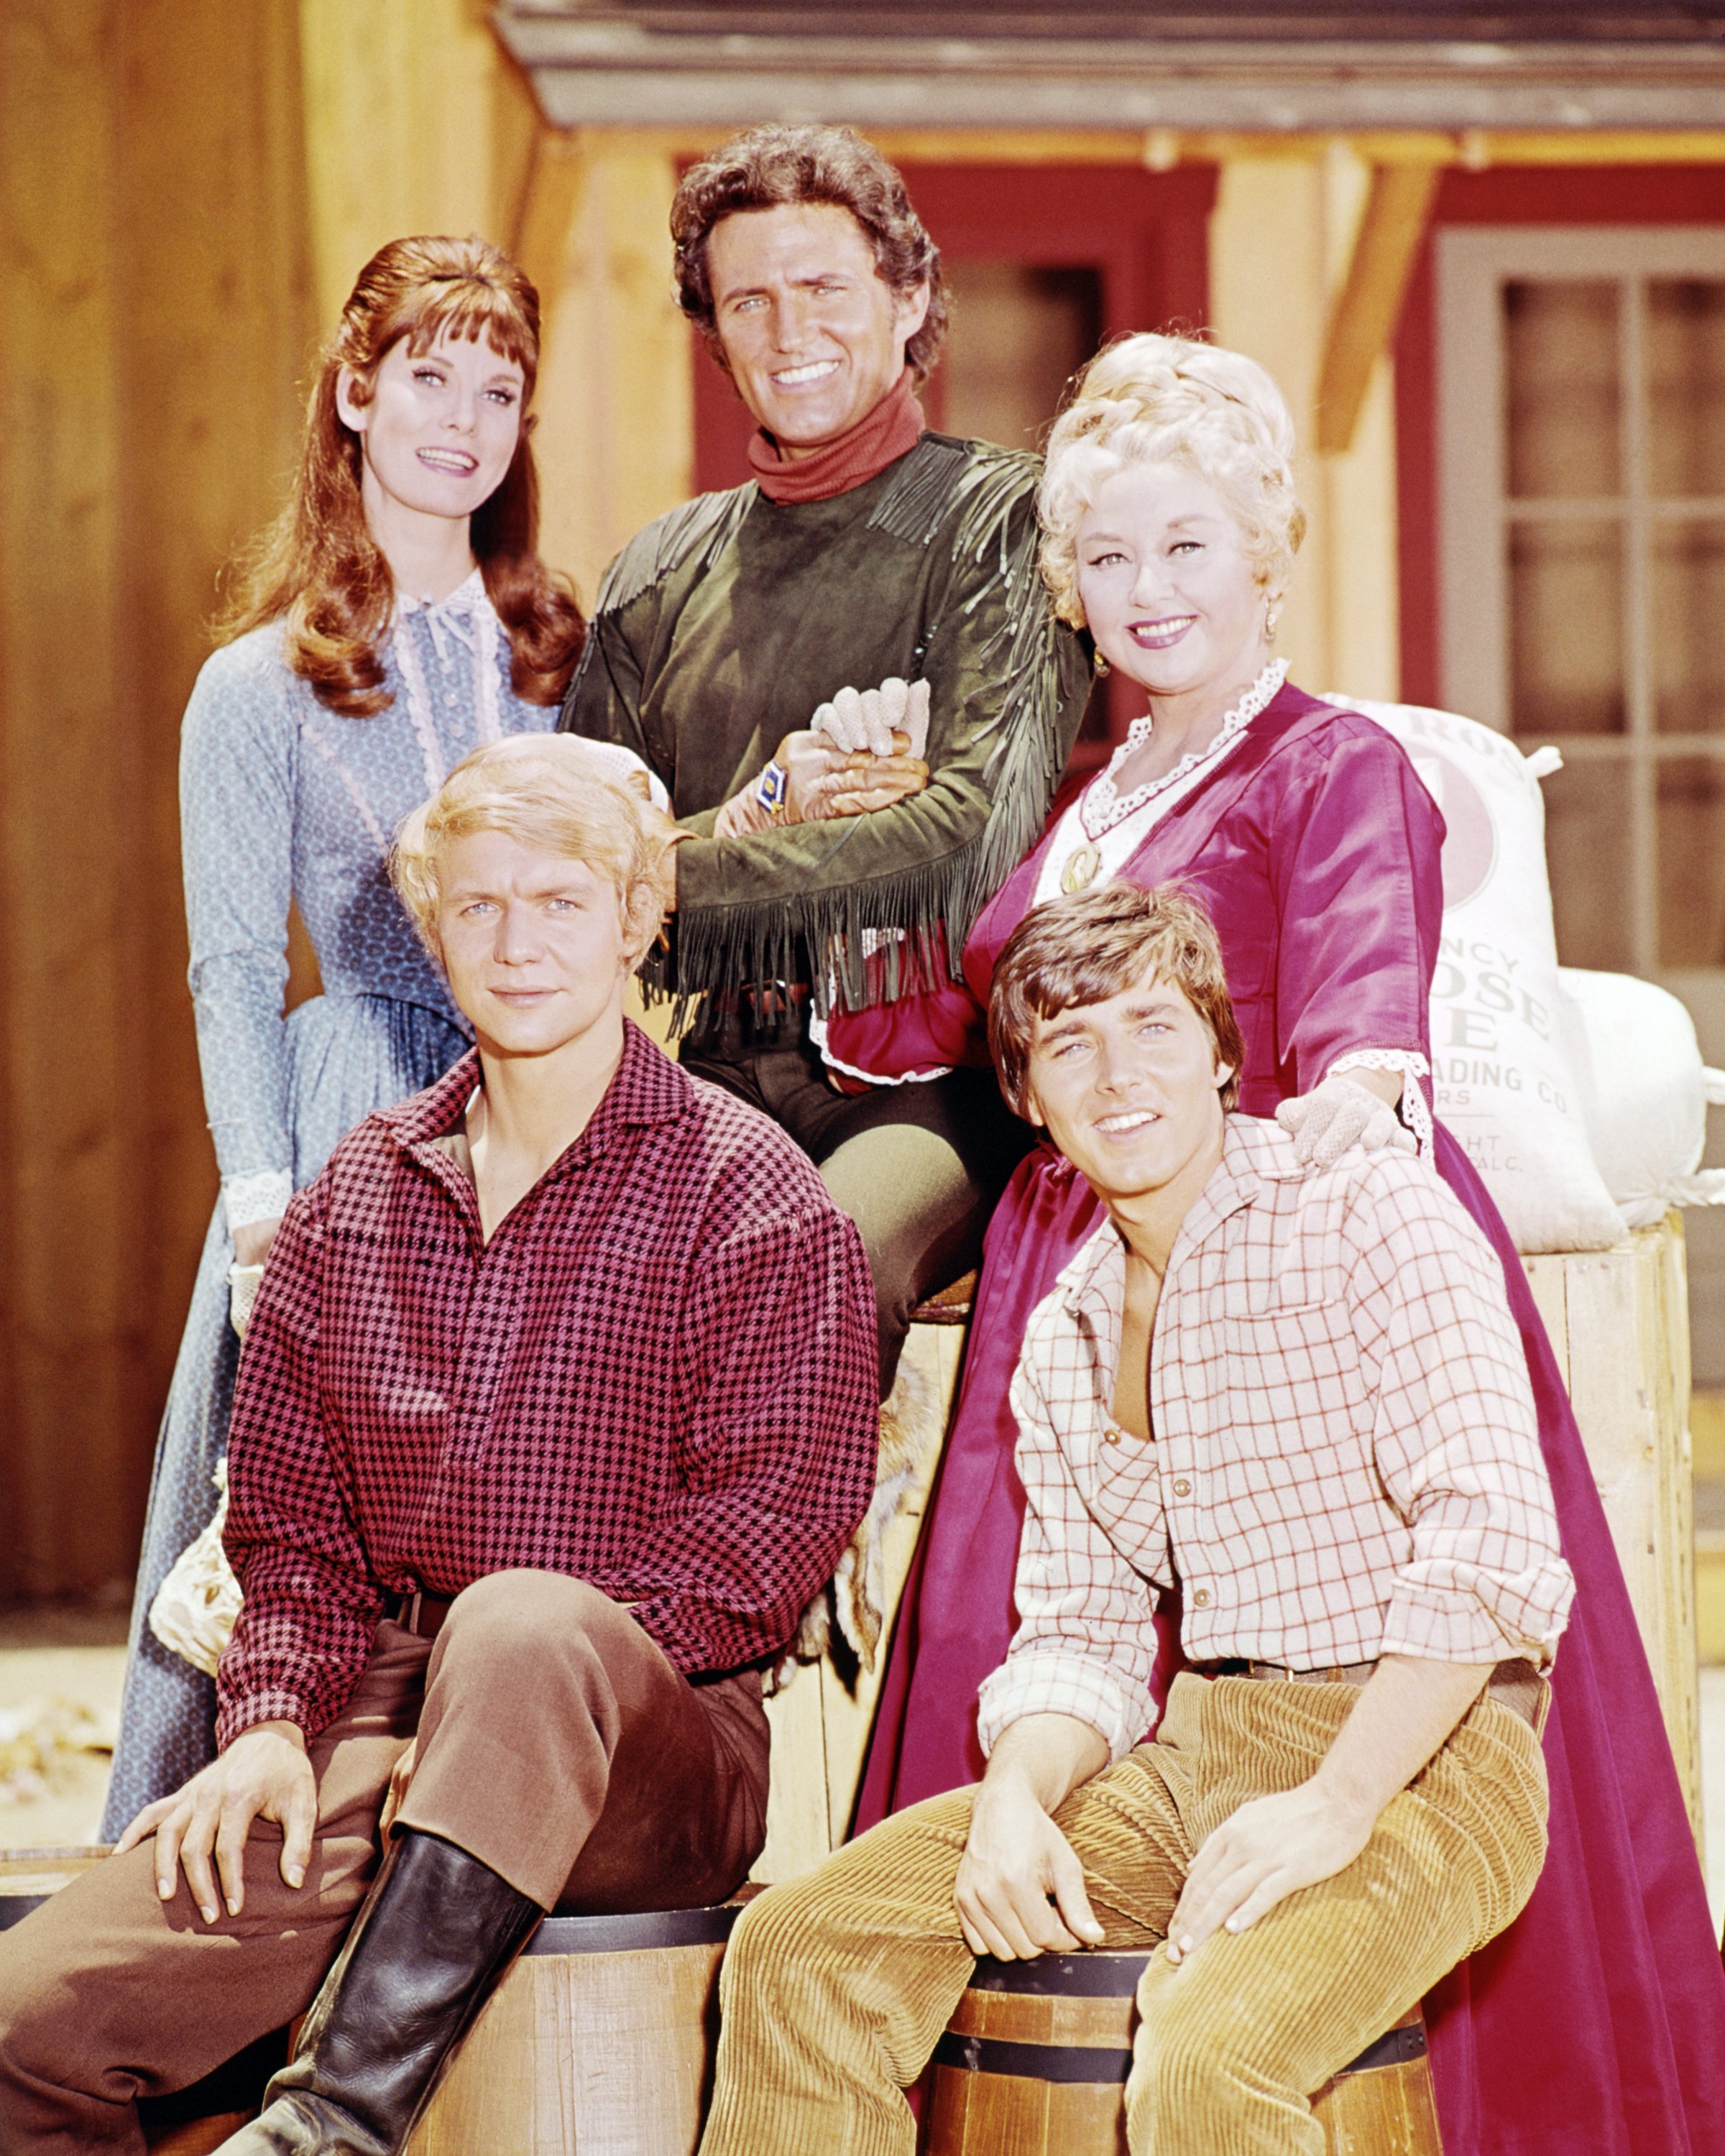 The cast of the American comedy western TV series "Here Come The Brides" circa 1969. Bridget Hanley, Robert Brown and Joan Blondell [Standing, Left-Right] David Soul and Bobby Sherman [Sitting, Left-Right] | Source: Getty Images